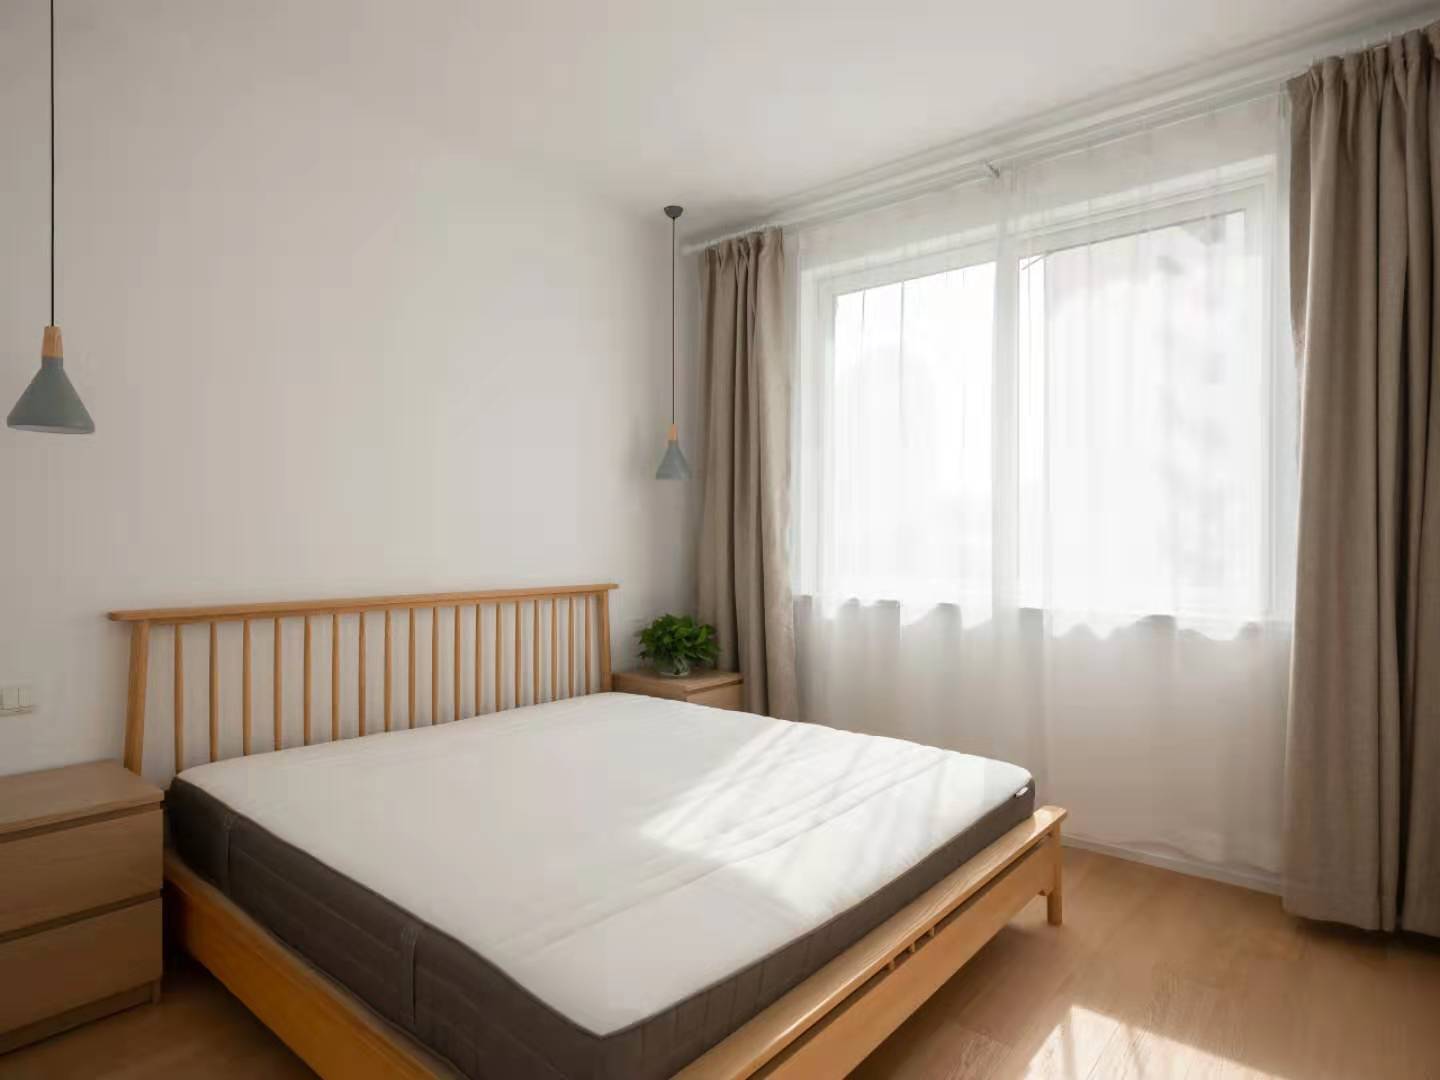 Big bedroom Bright 3BR FFC Apartment w Balcony nr LN 1/7/9 for Rent in Shanghai